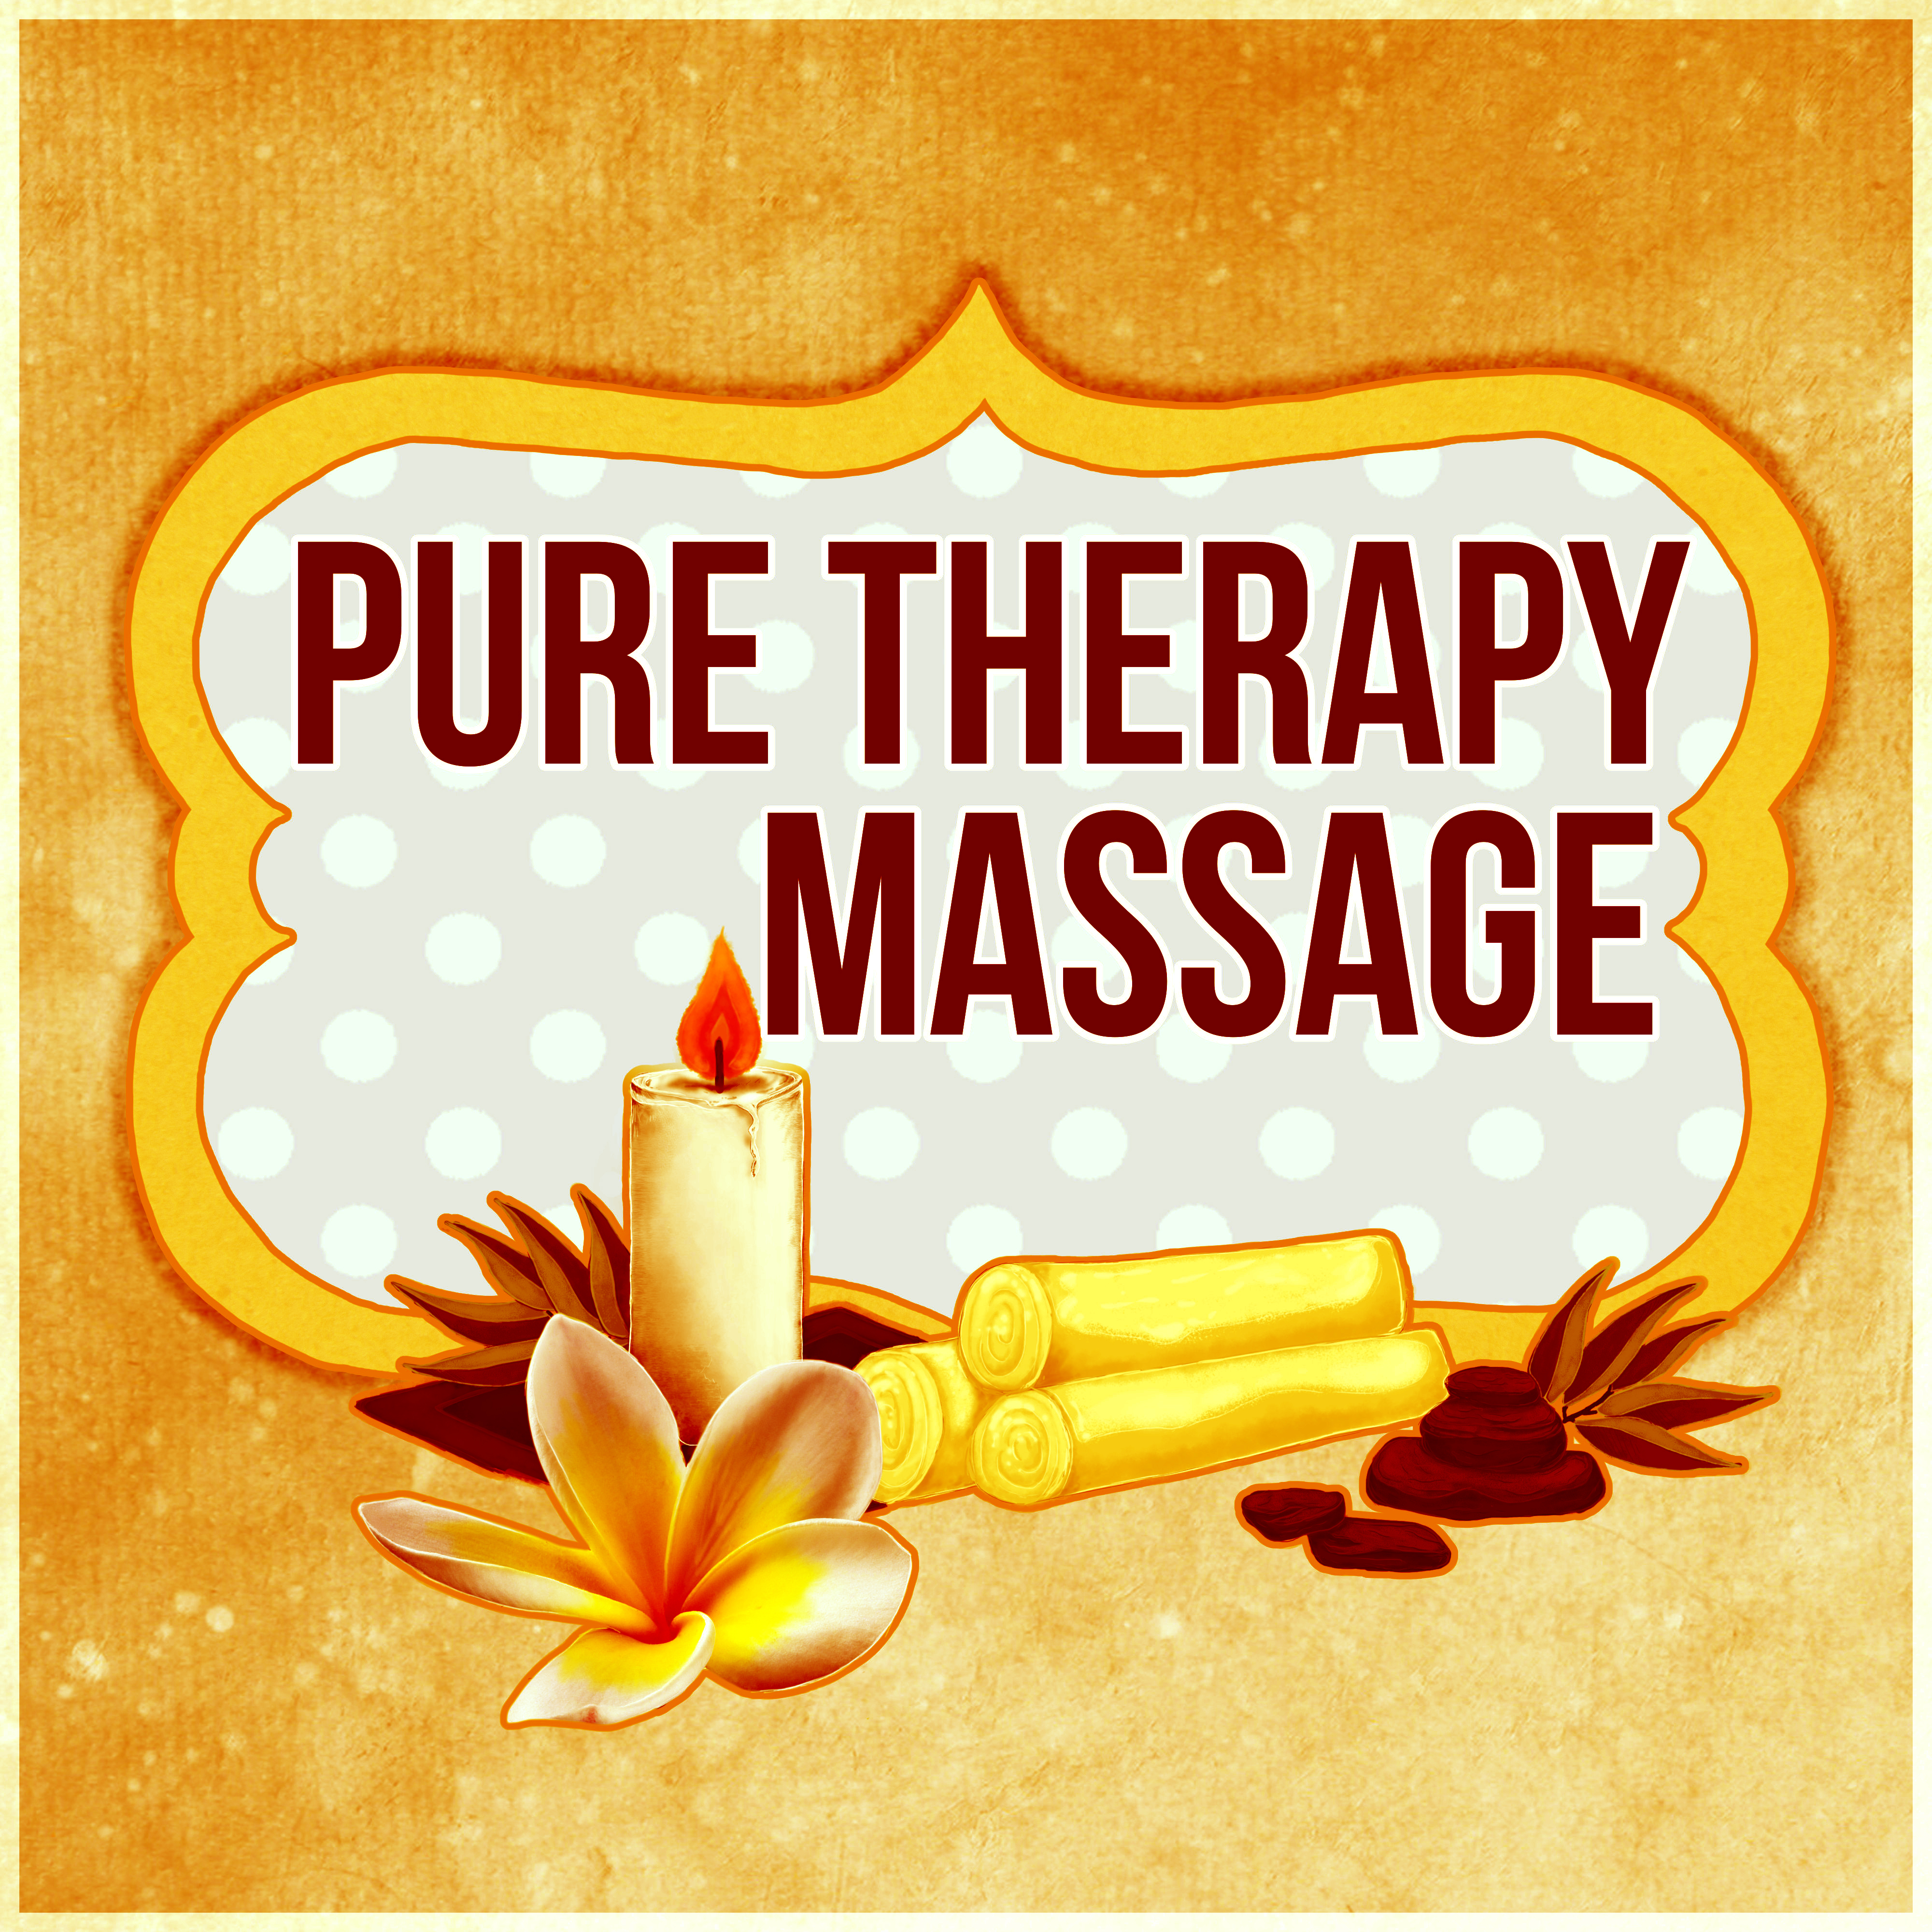 Pure Therapy Massage - Nature Sounds, Sensual Massage, Intimate Moments, Amazing Home Spa, Music for Aromatherapy, Instrumental Music